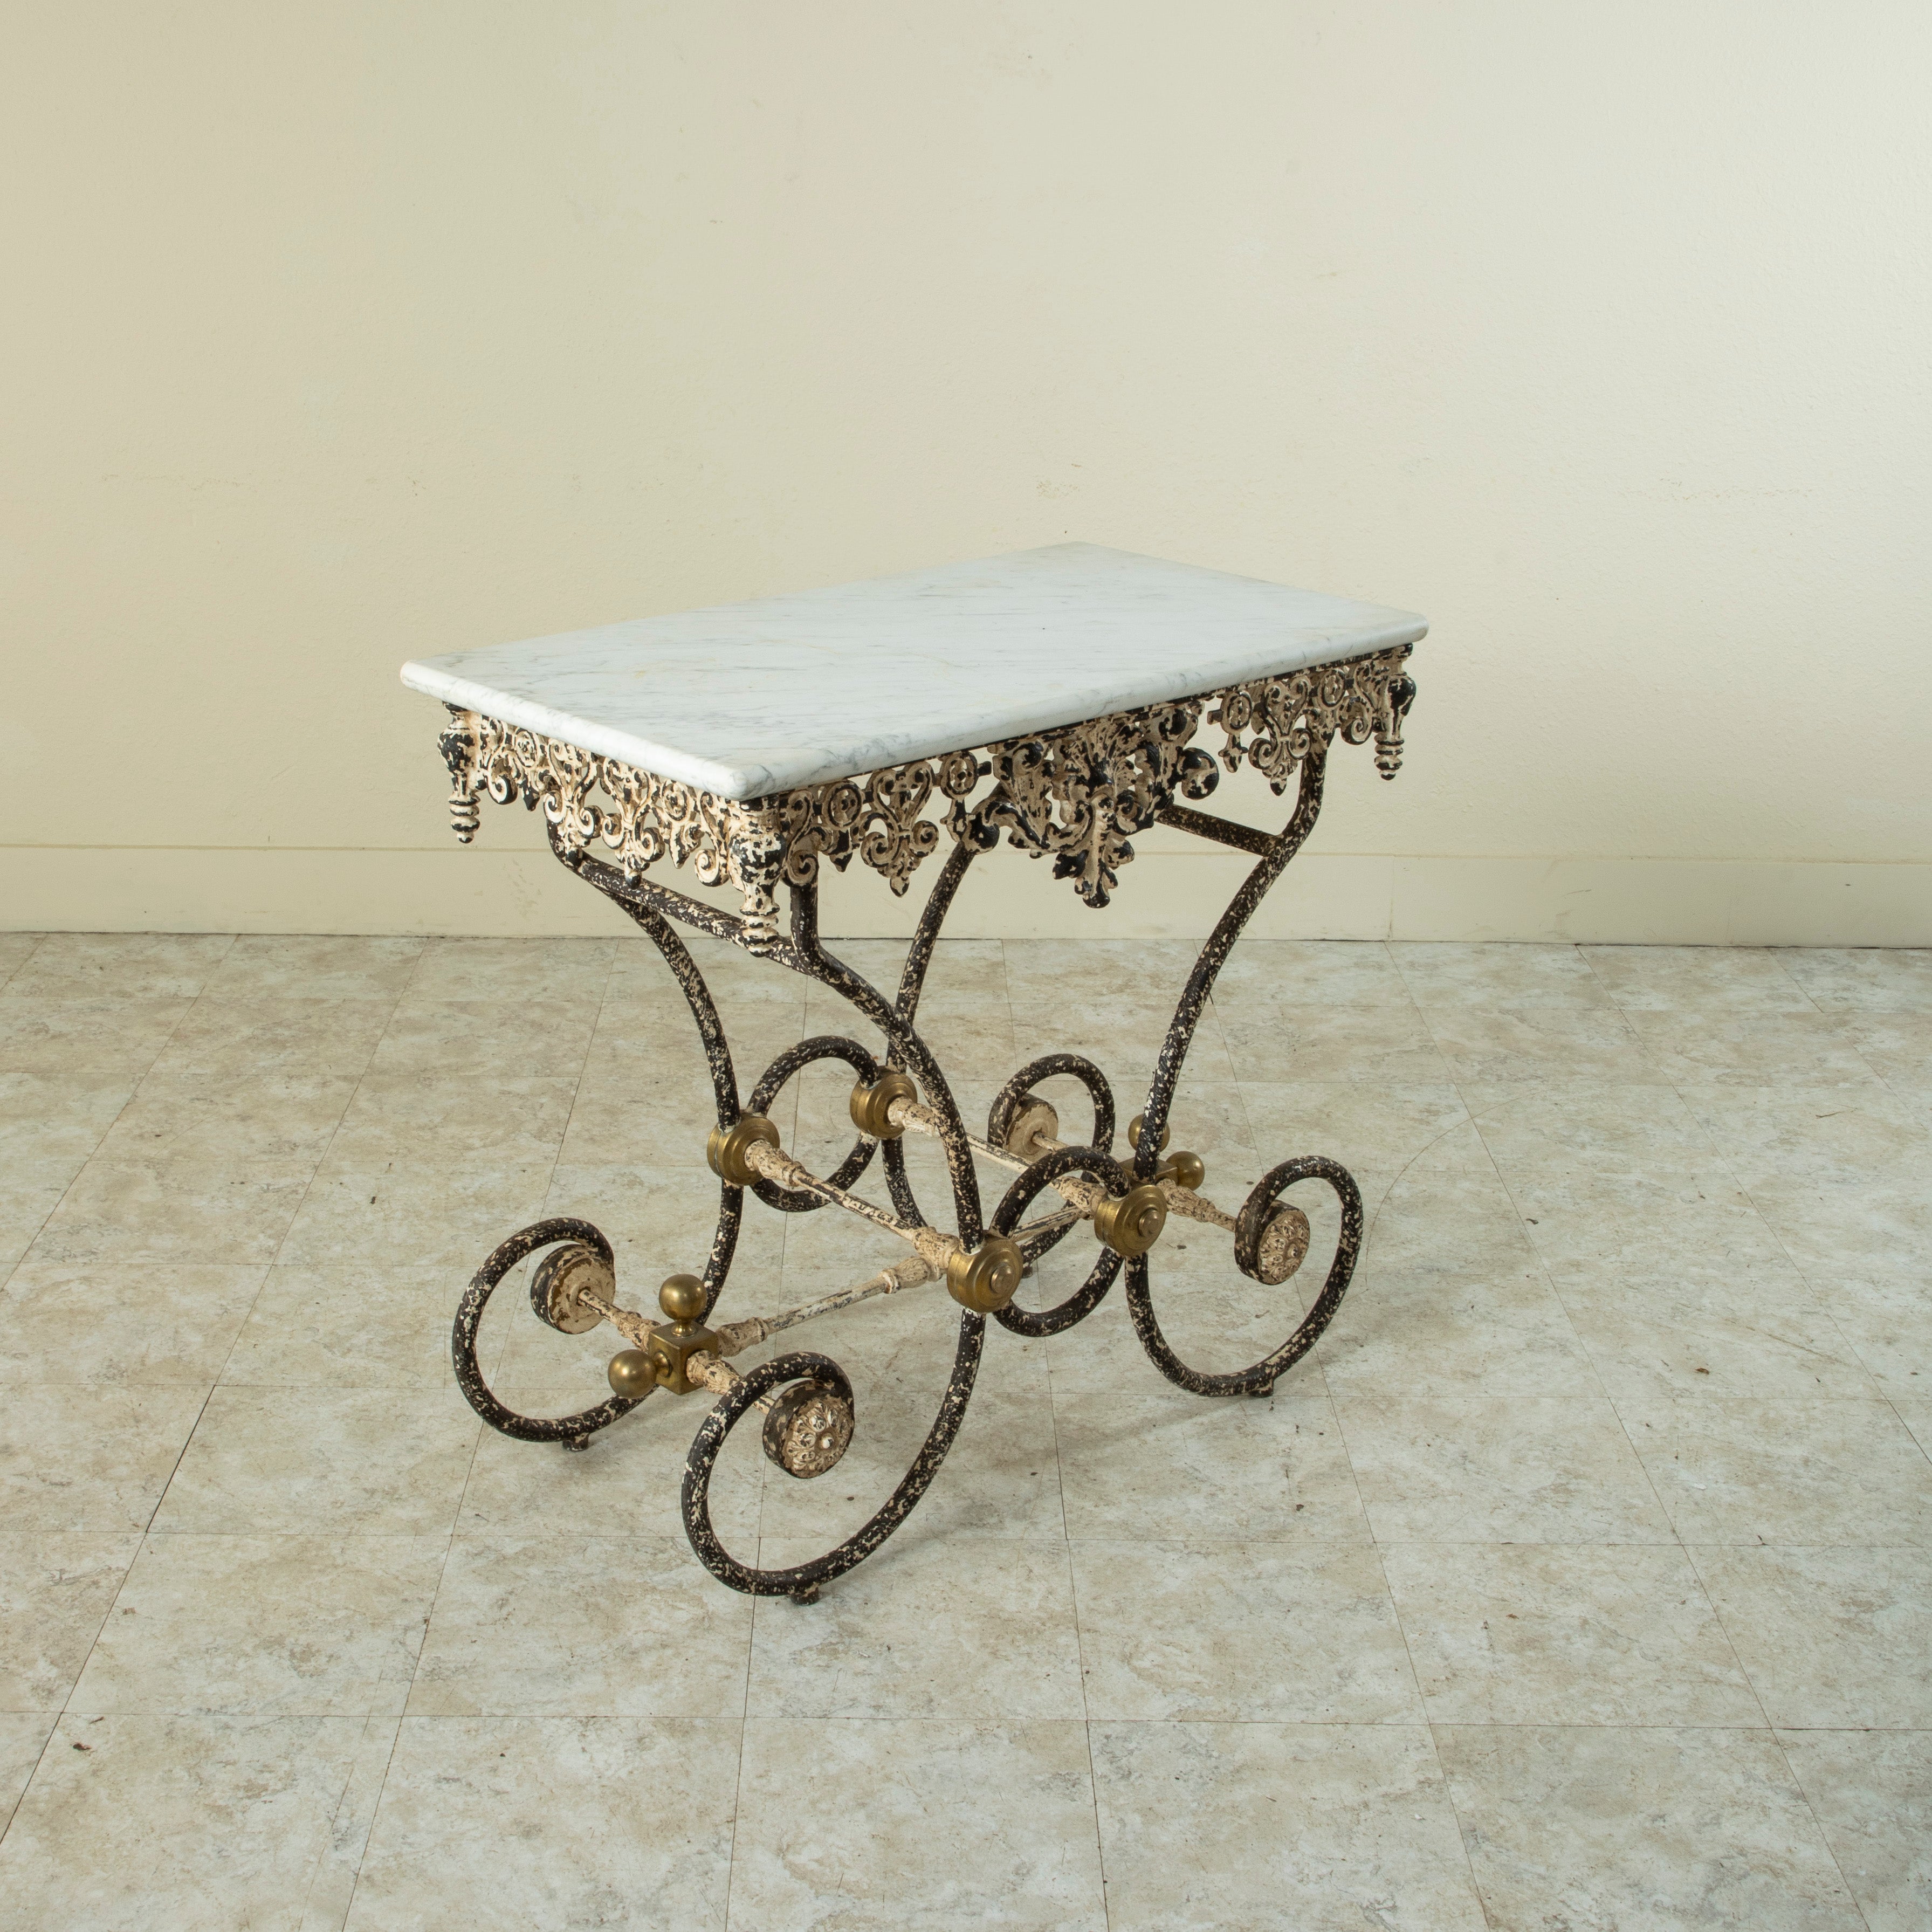 This mid-twentieth century French cast iron pastry table features a solid white marble top. The marble rests on an intricately scrolled iron base detailed with bronze medallions that connect the legs. Vestiges of paint on the iron base lend a lovely